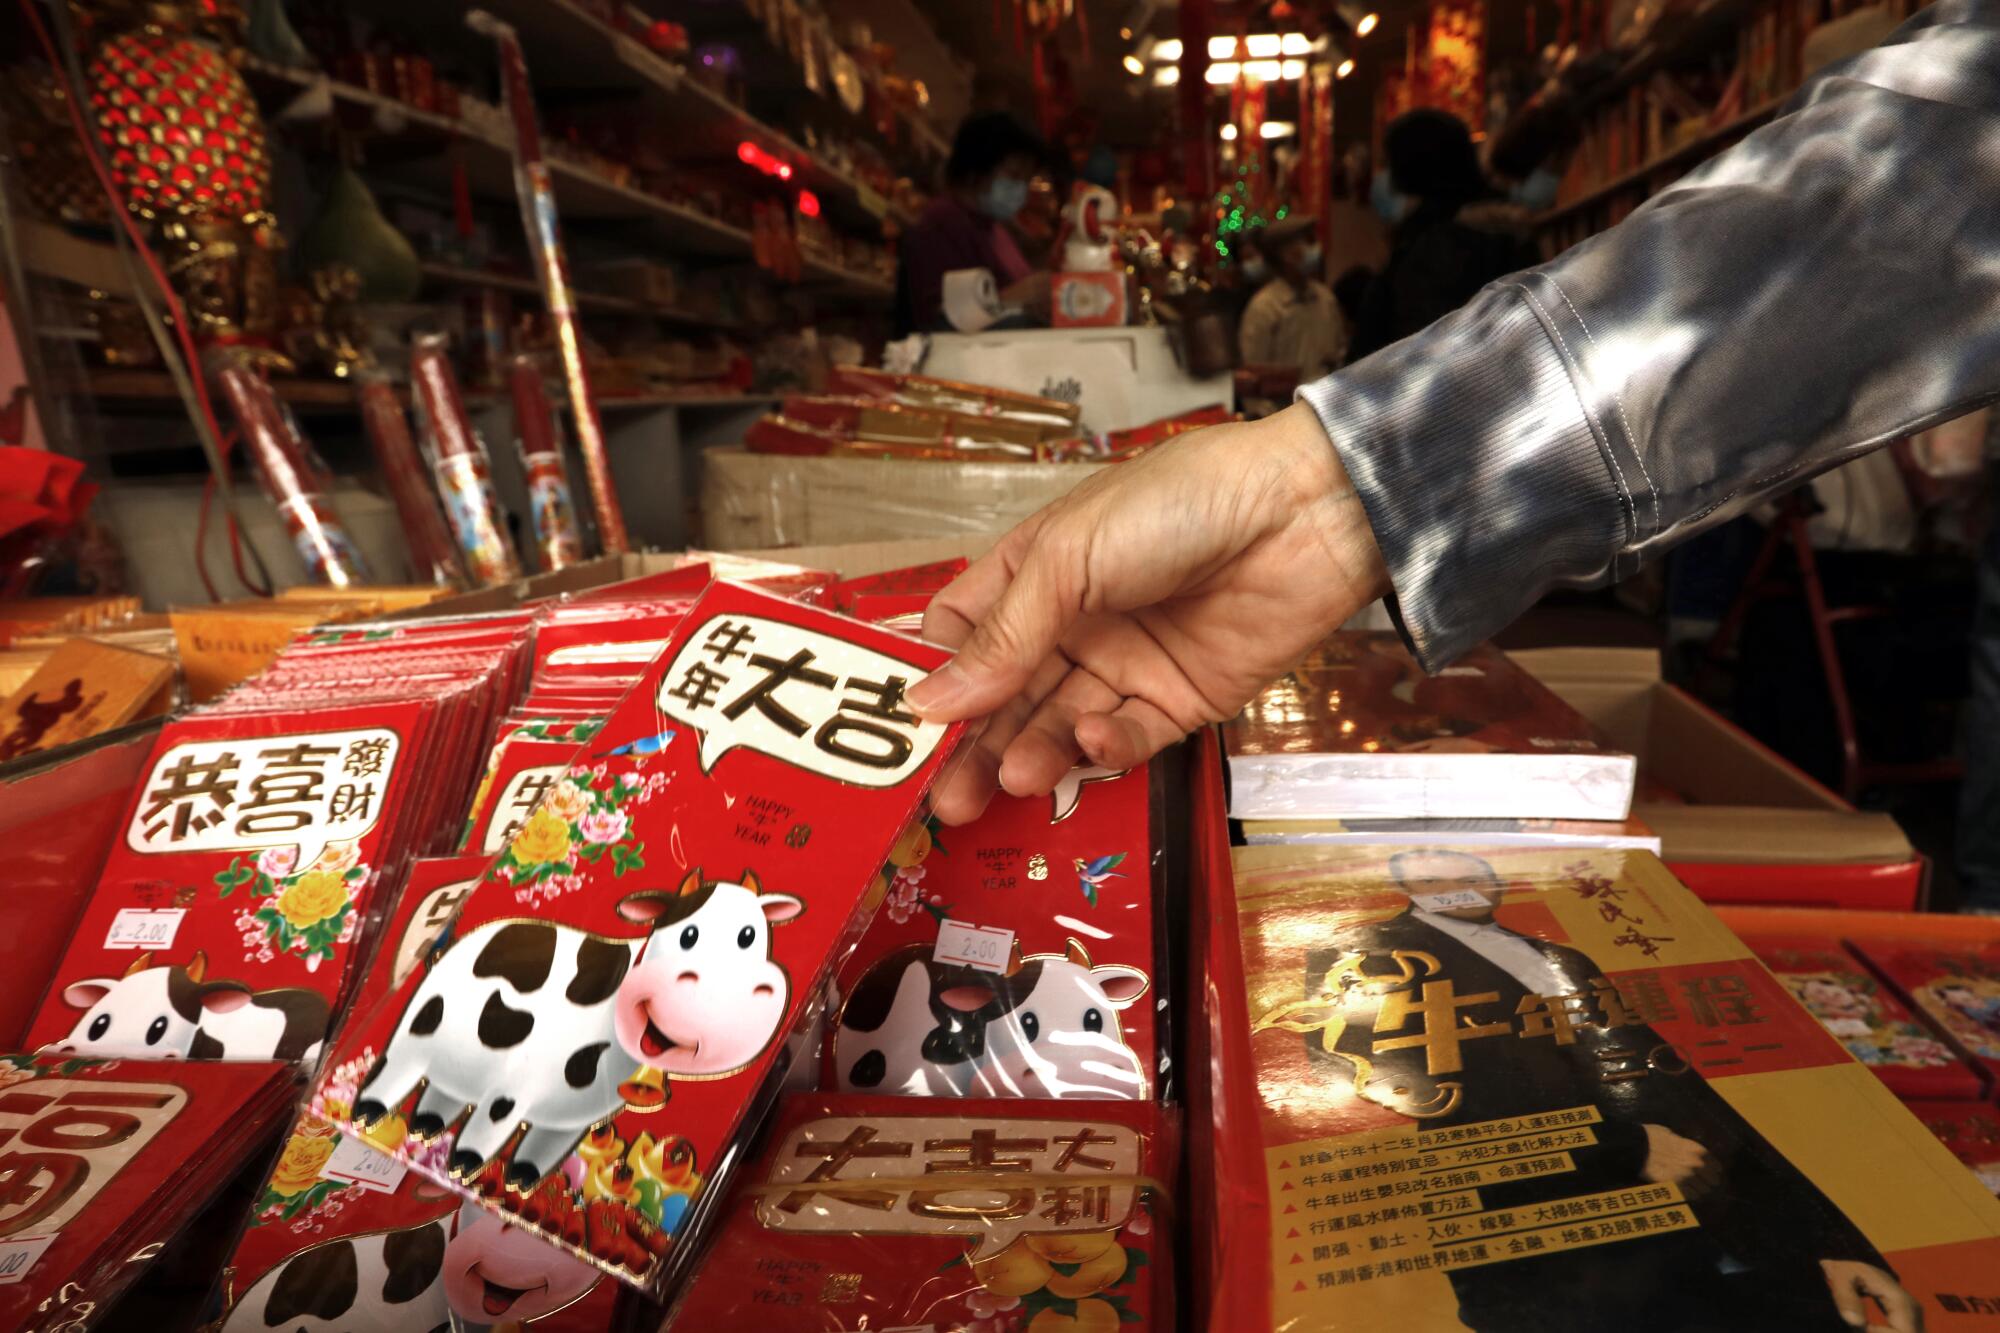 As the Chinese New Year approaches, business is light in Chinatown in downtown Los Angeles.